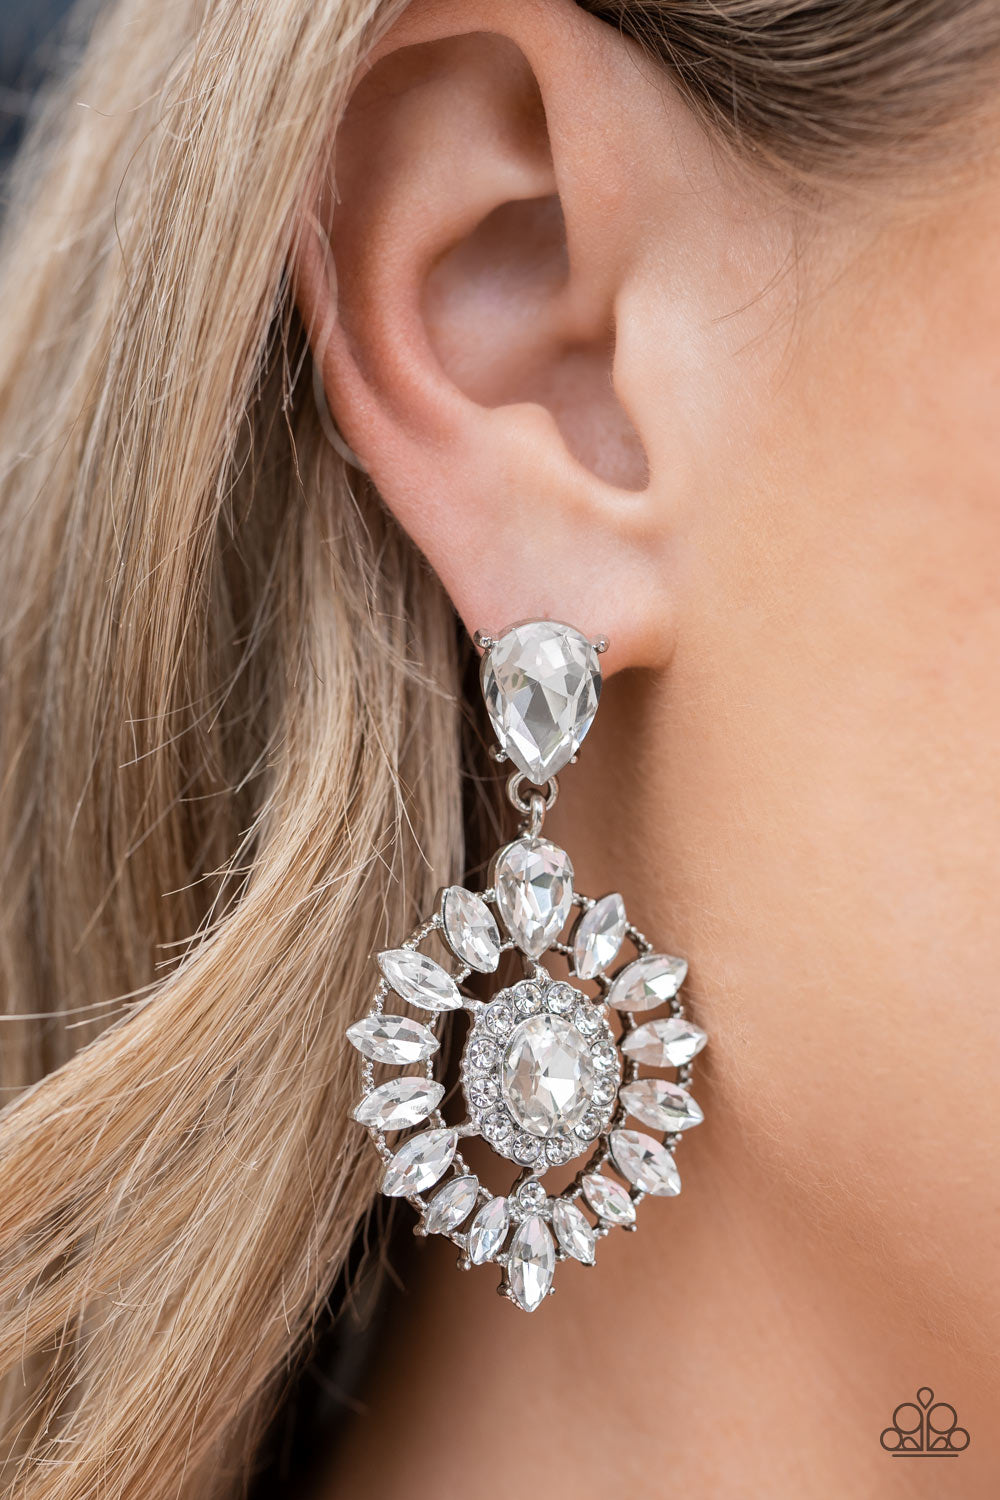 My Good LUXE Charm - White Paparazzi Earrings